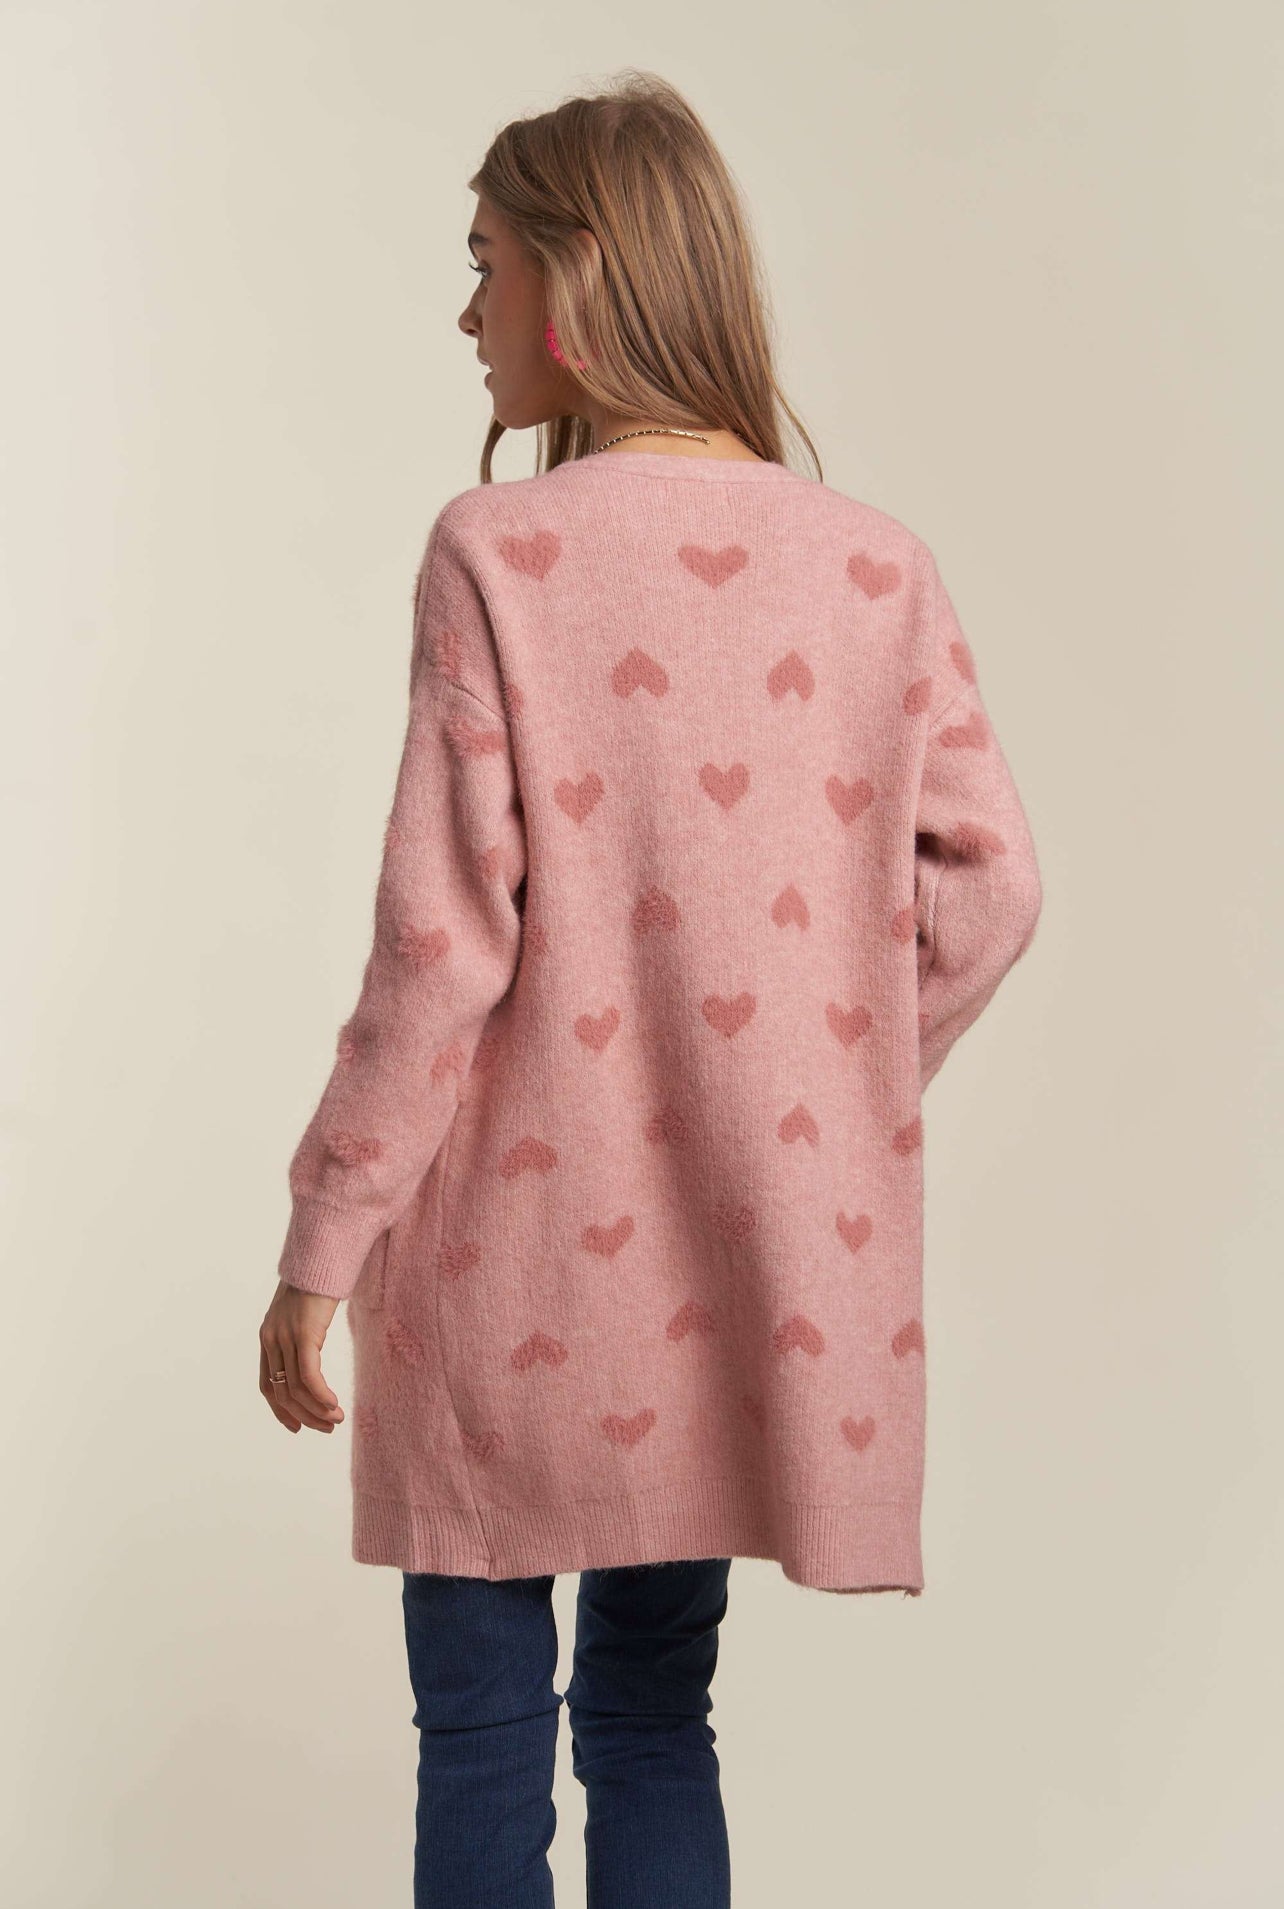 Scattered Hearts Cardigan